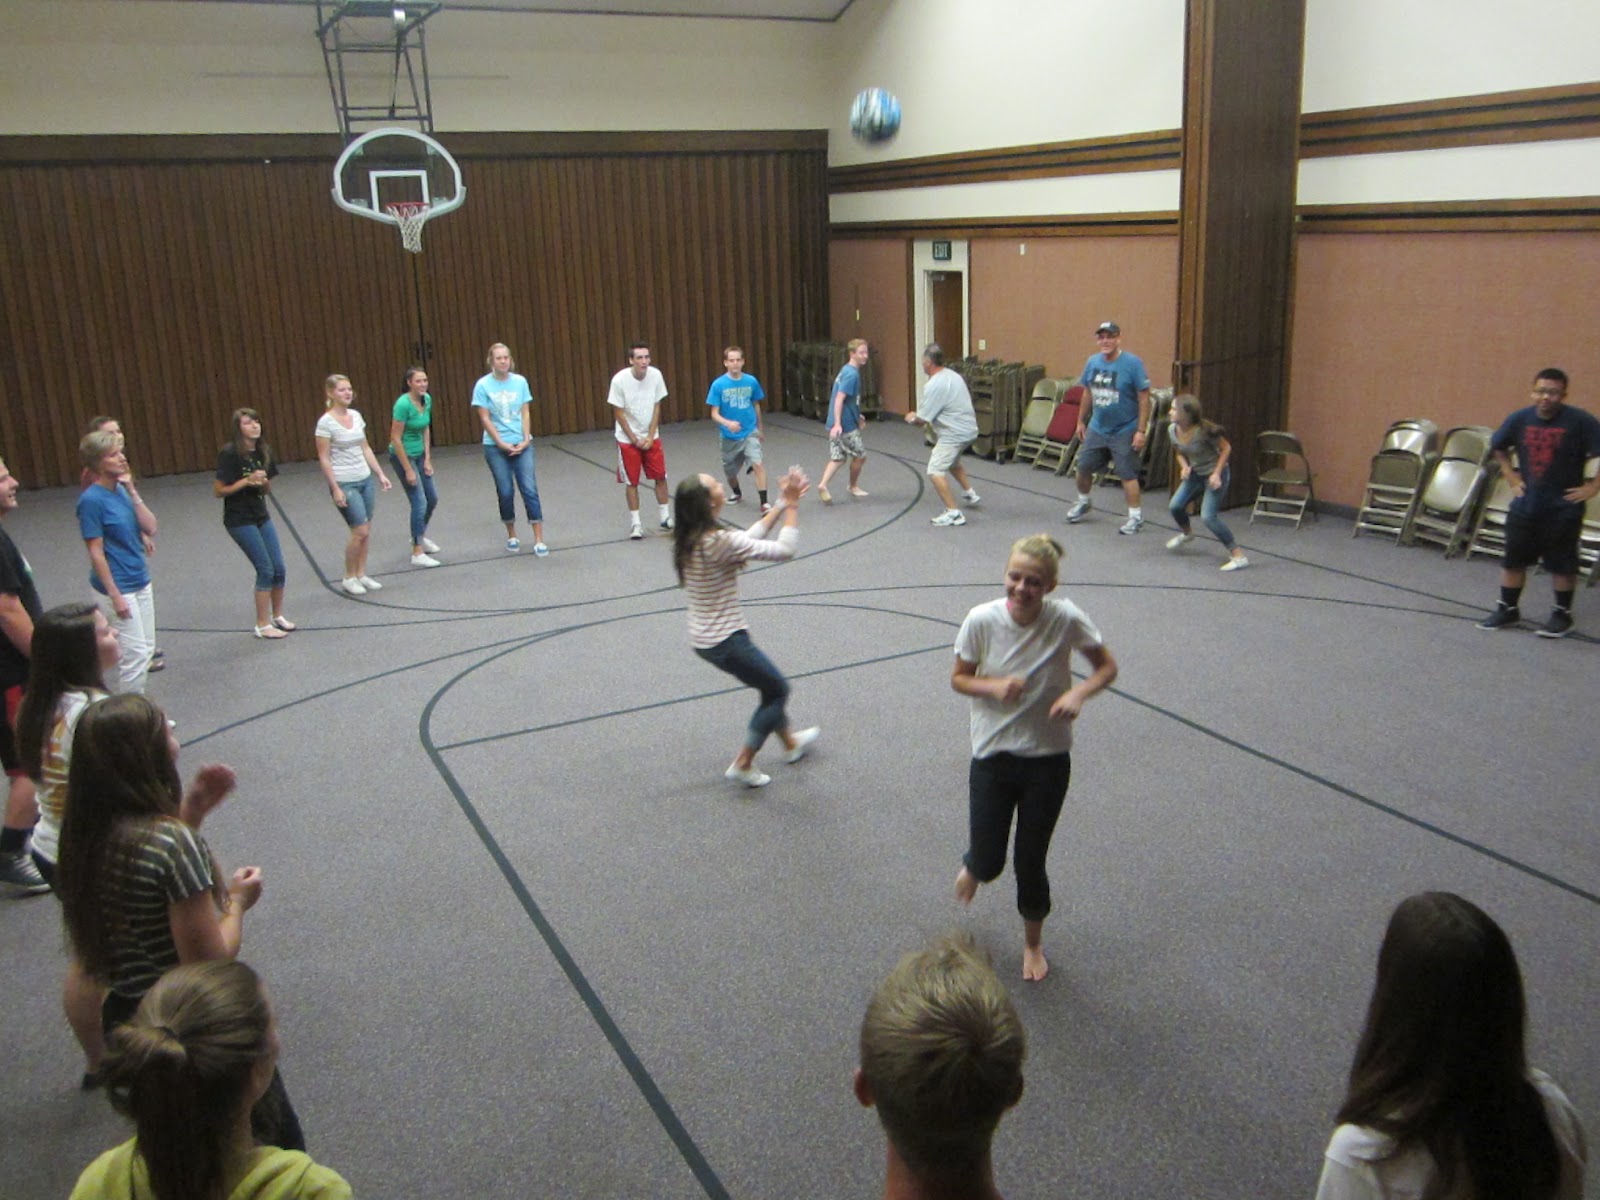 EPic Indoor Youth Group Ball Games with Epic Design ideas